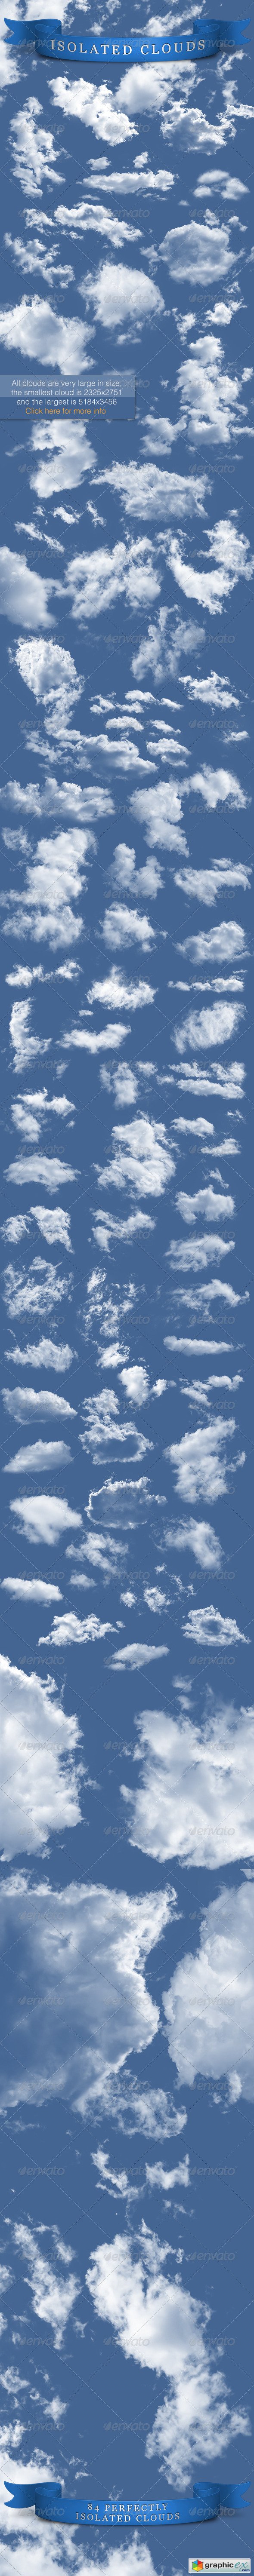 Isolated Clouds Bundle